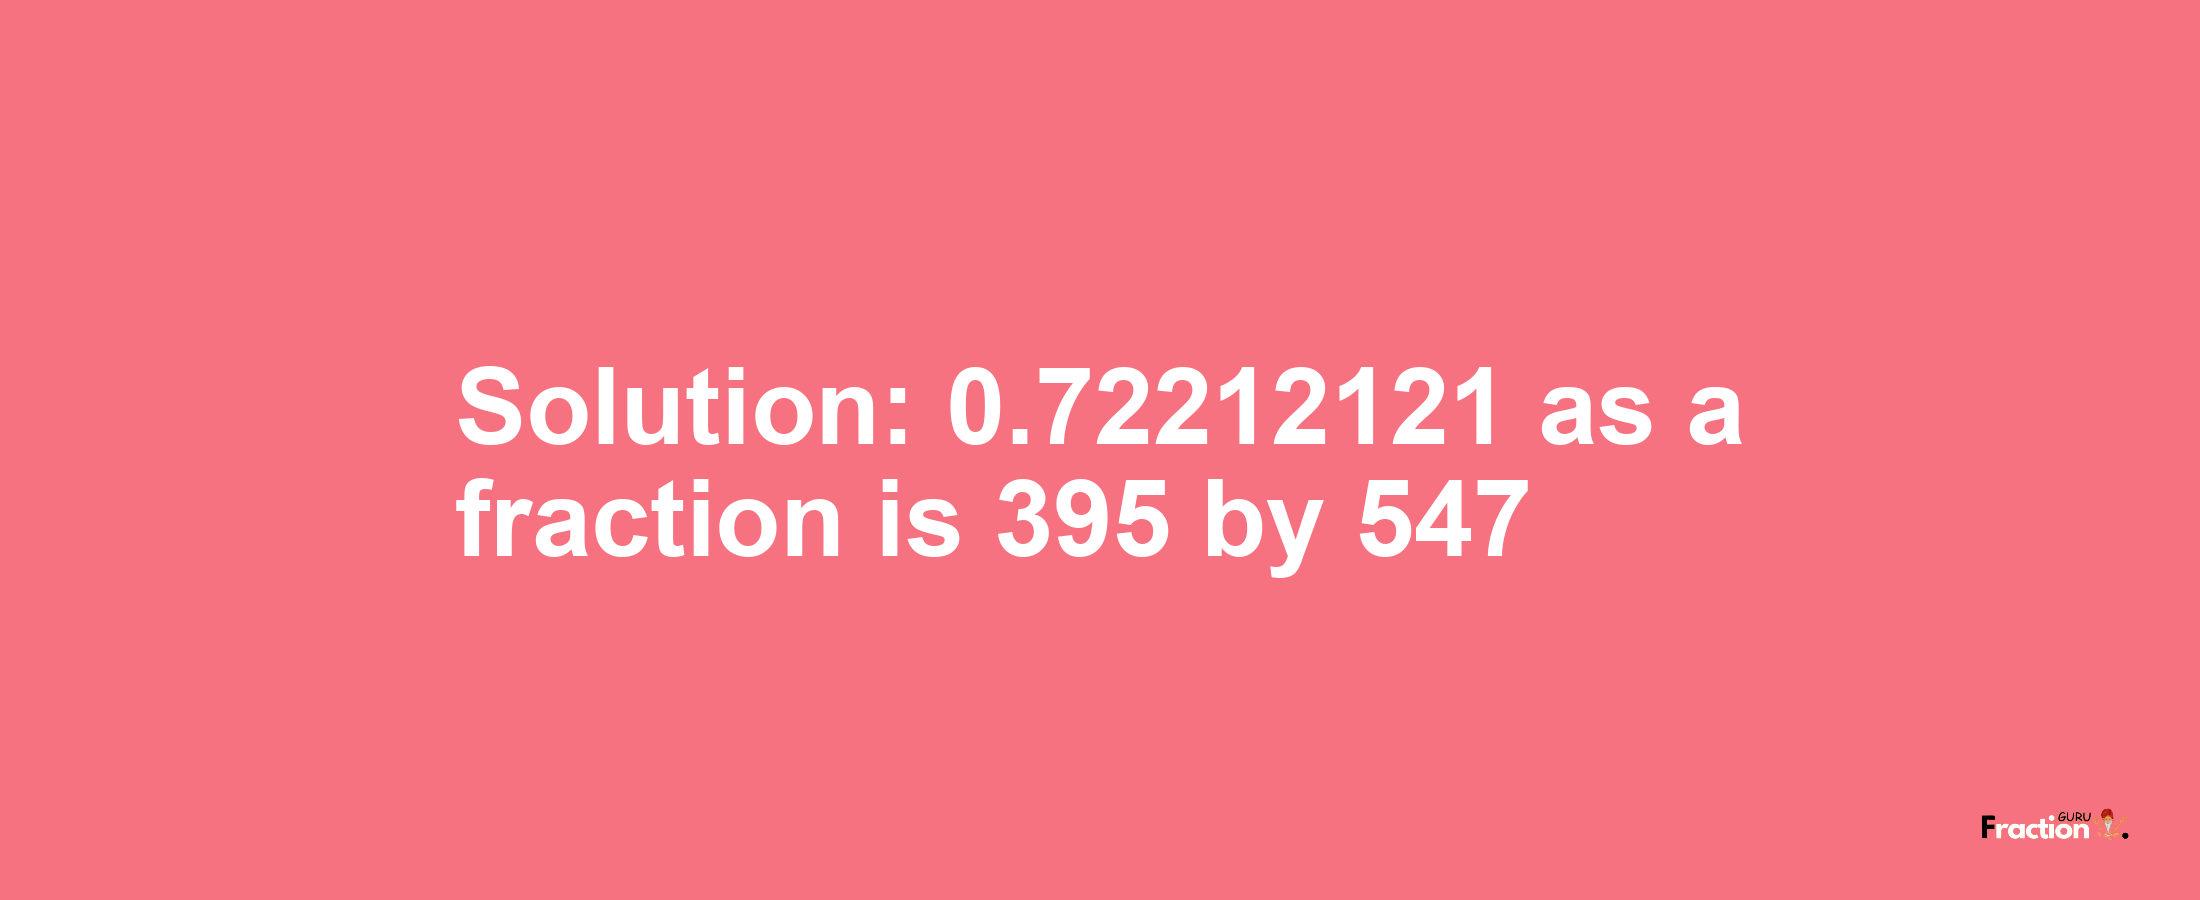 Solution:0.72212121 as a fraction is 395/547